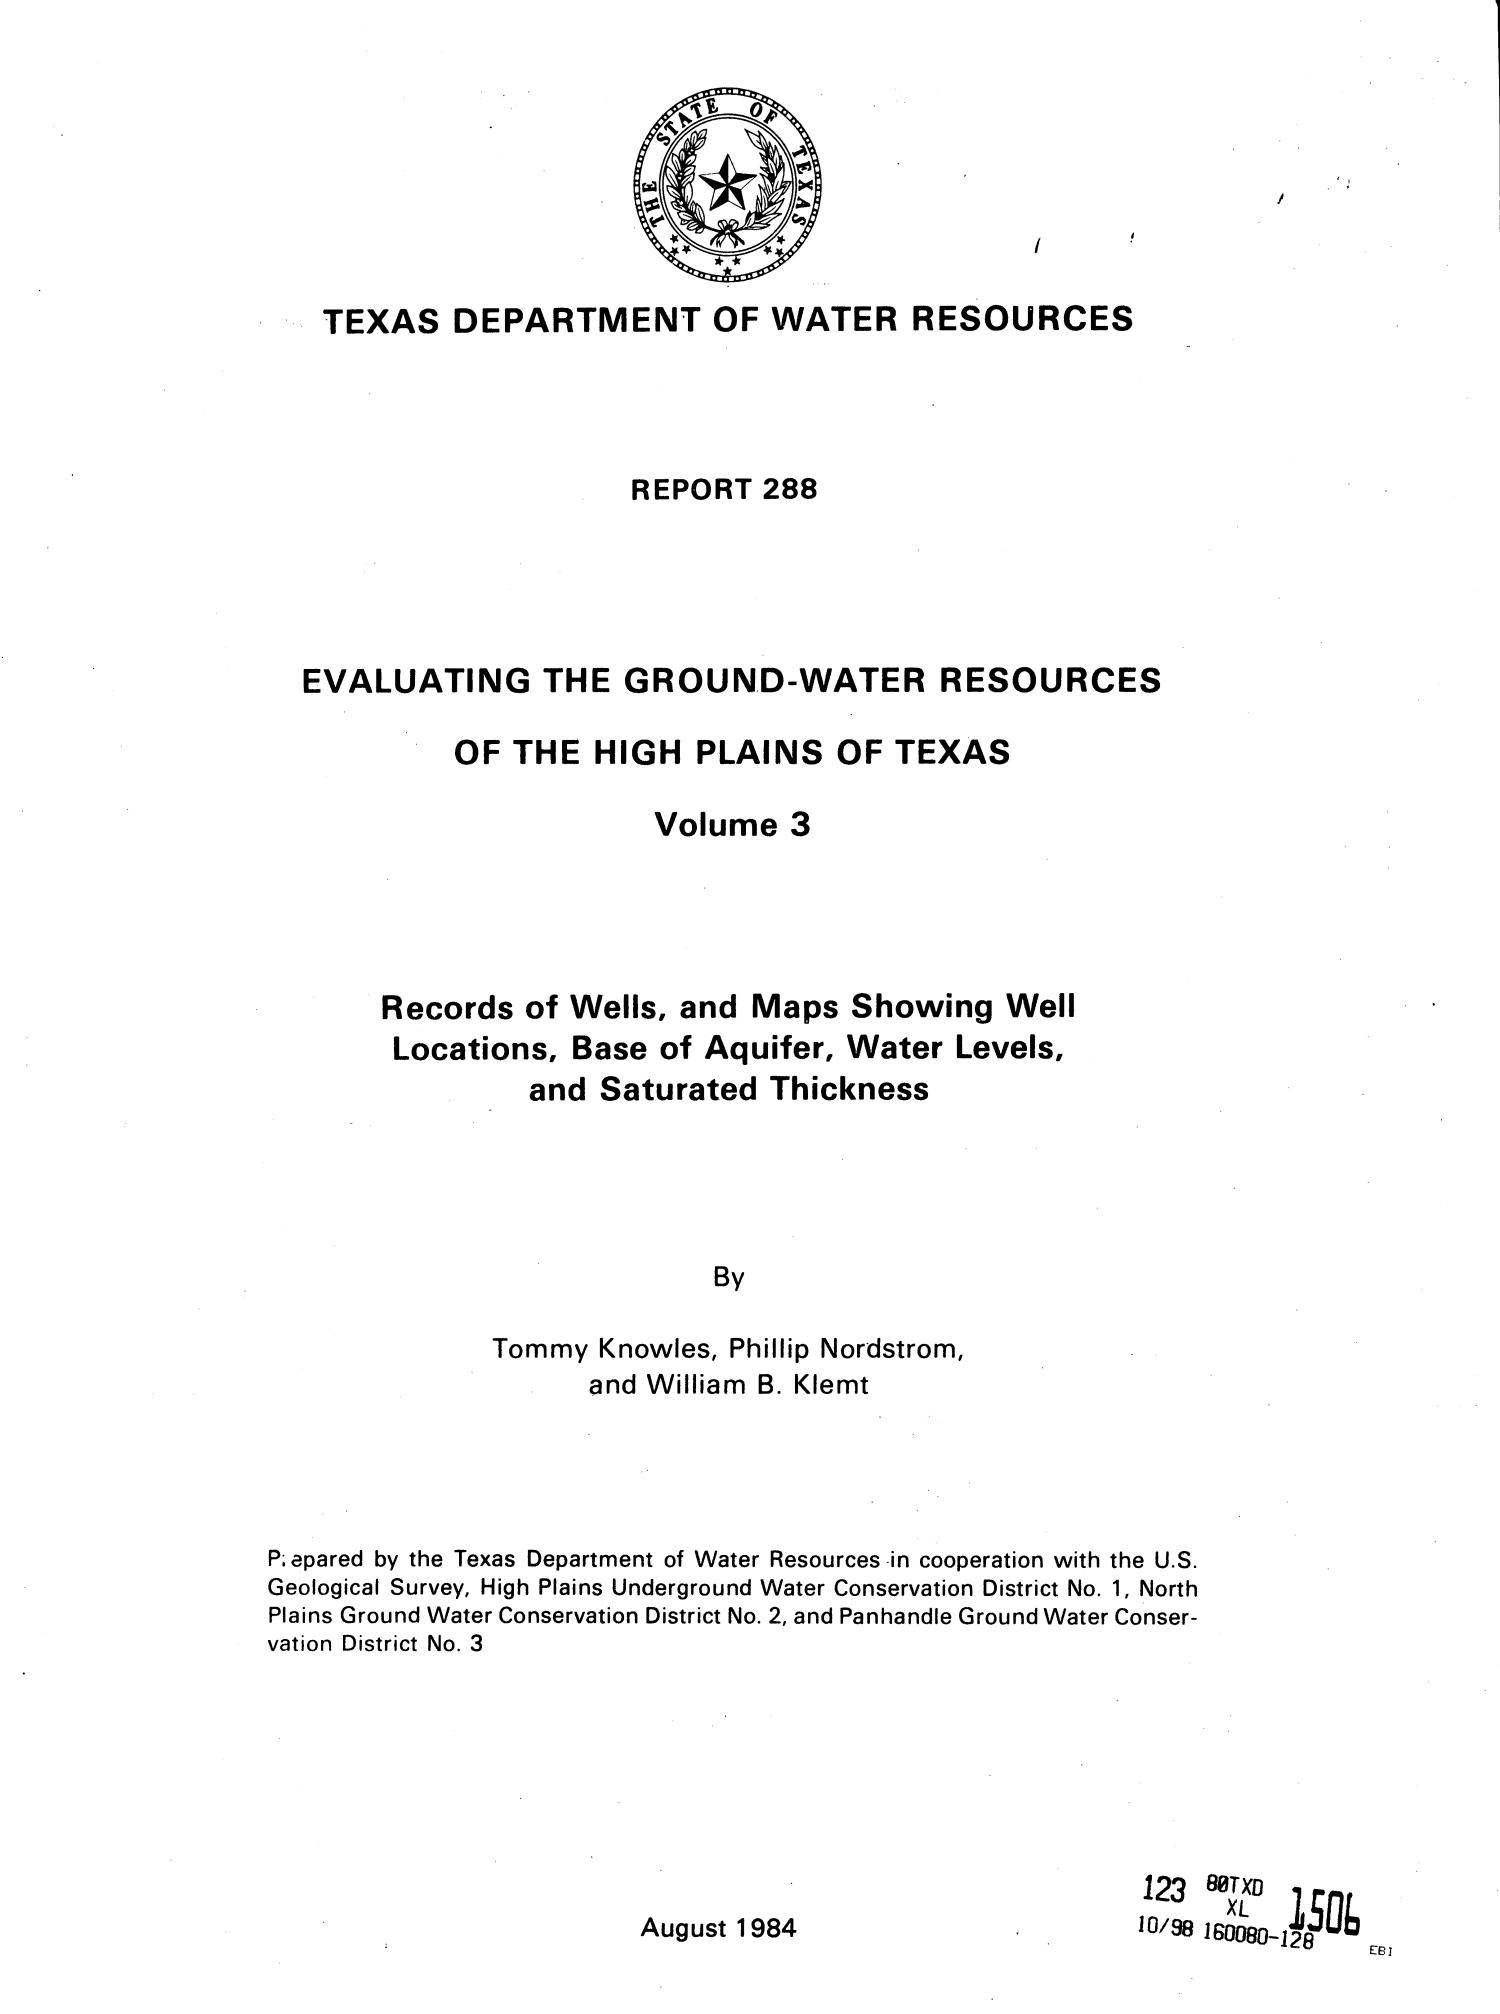 Evaluating the Ground-Water Resources of the High Plains of Texas: Volume 3
                                                
                                                    TITLE PAGE
                                                